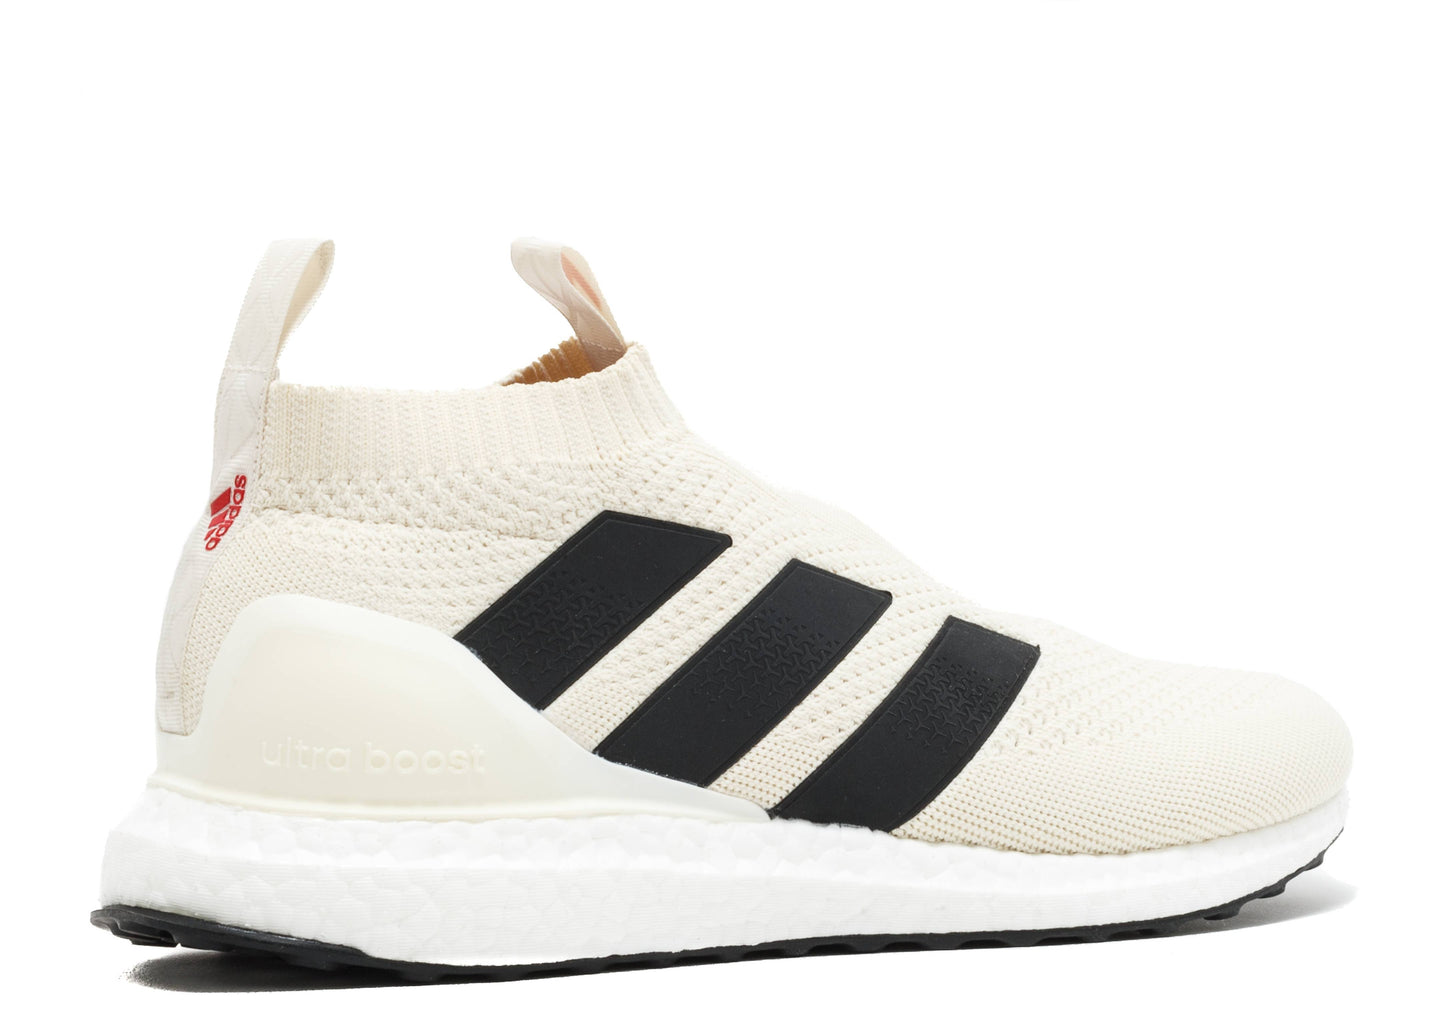 Adidas Ace 16+ PureControl Ultra Boost "Champagne"